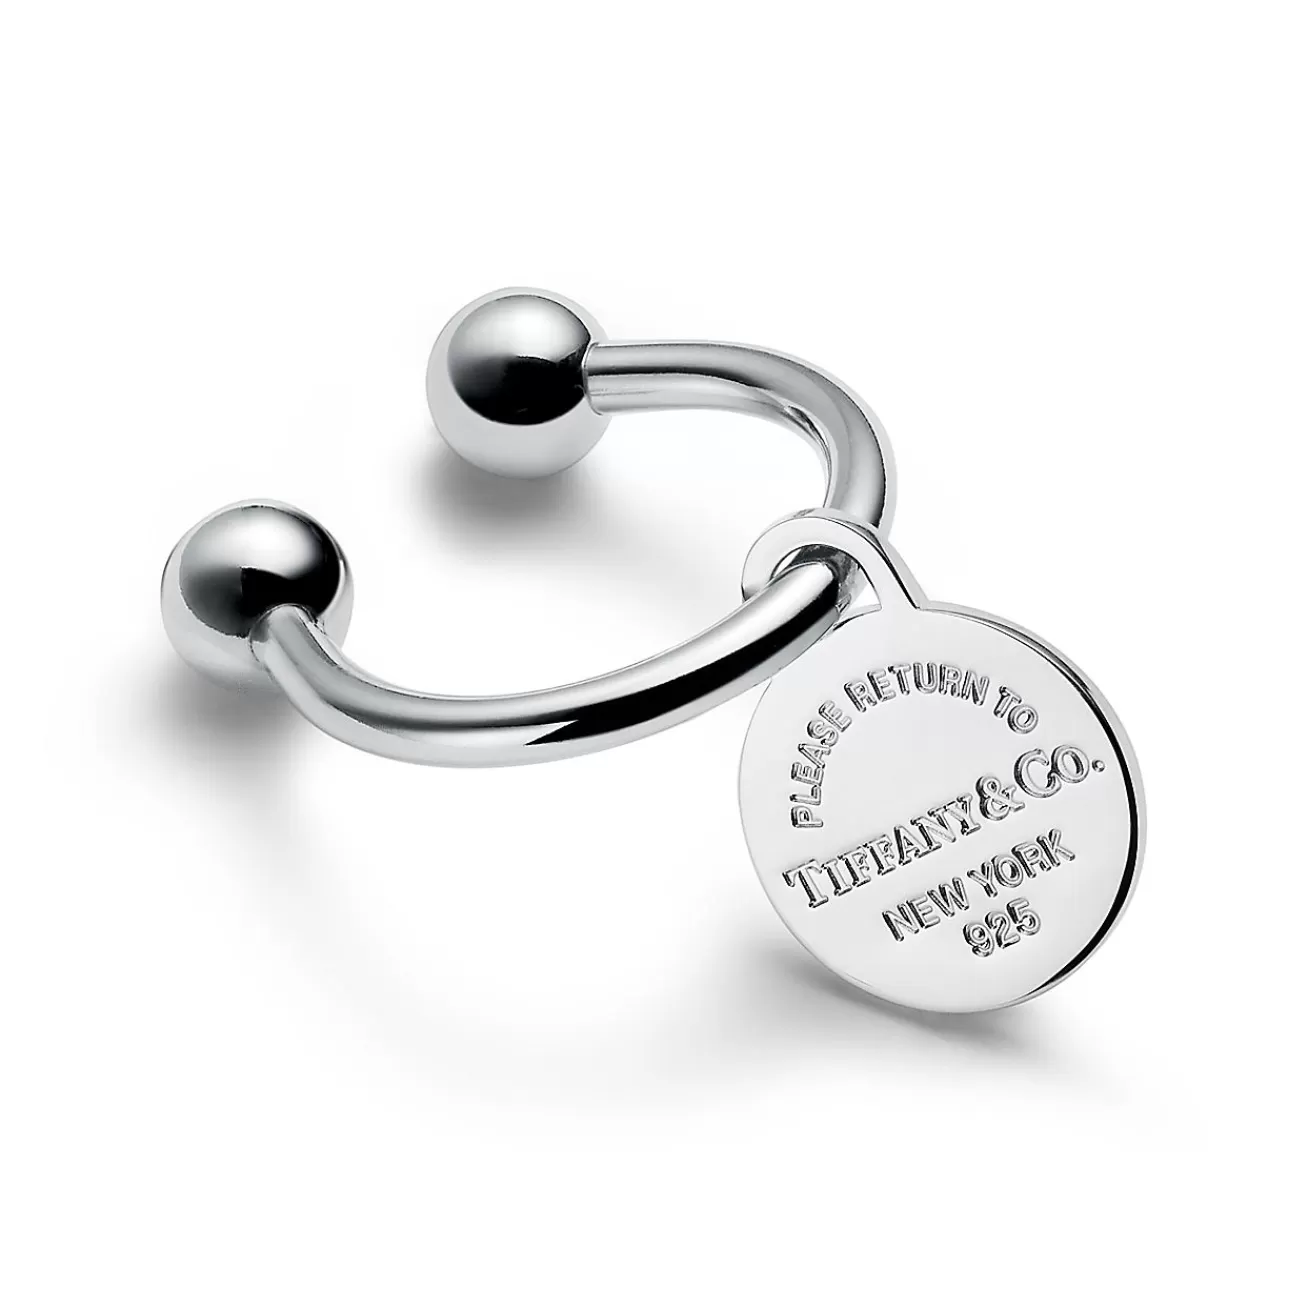 Tiffany & Co. Return to Tiffany® Round Tag Screwball Key Ring in Sterling Silver | ^Women Business Gifts | Key Rings